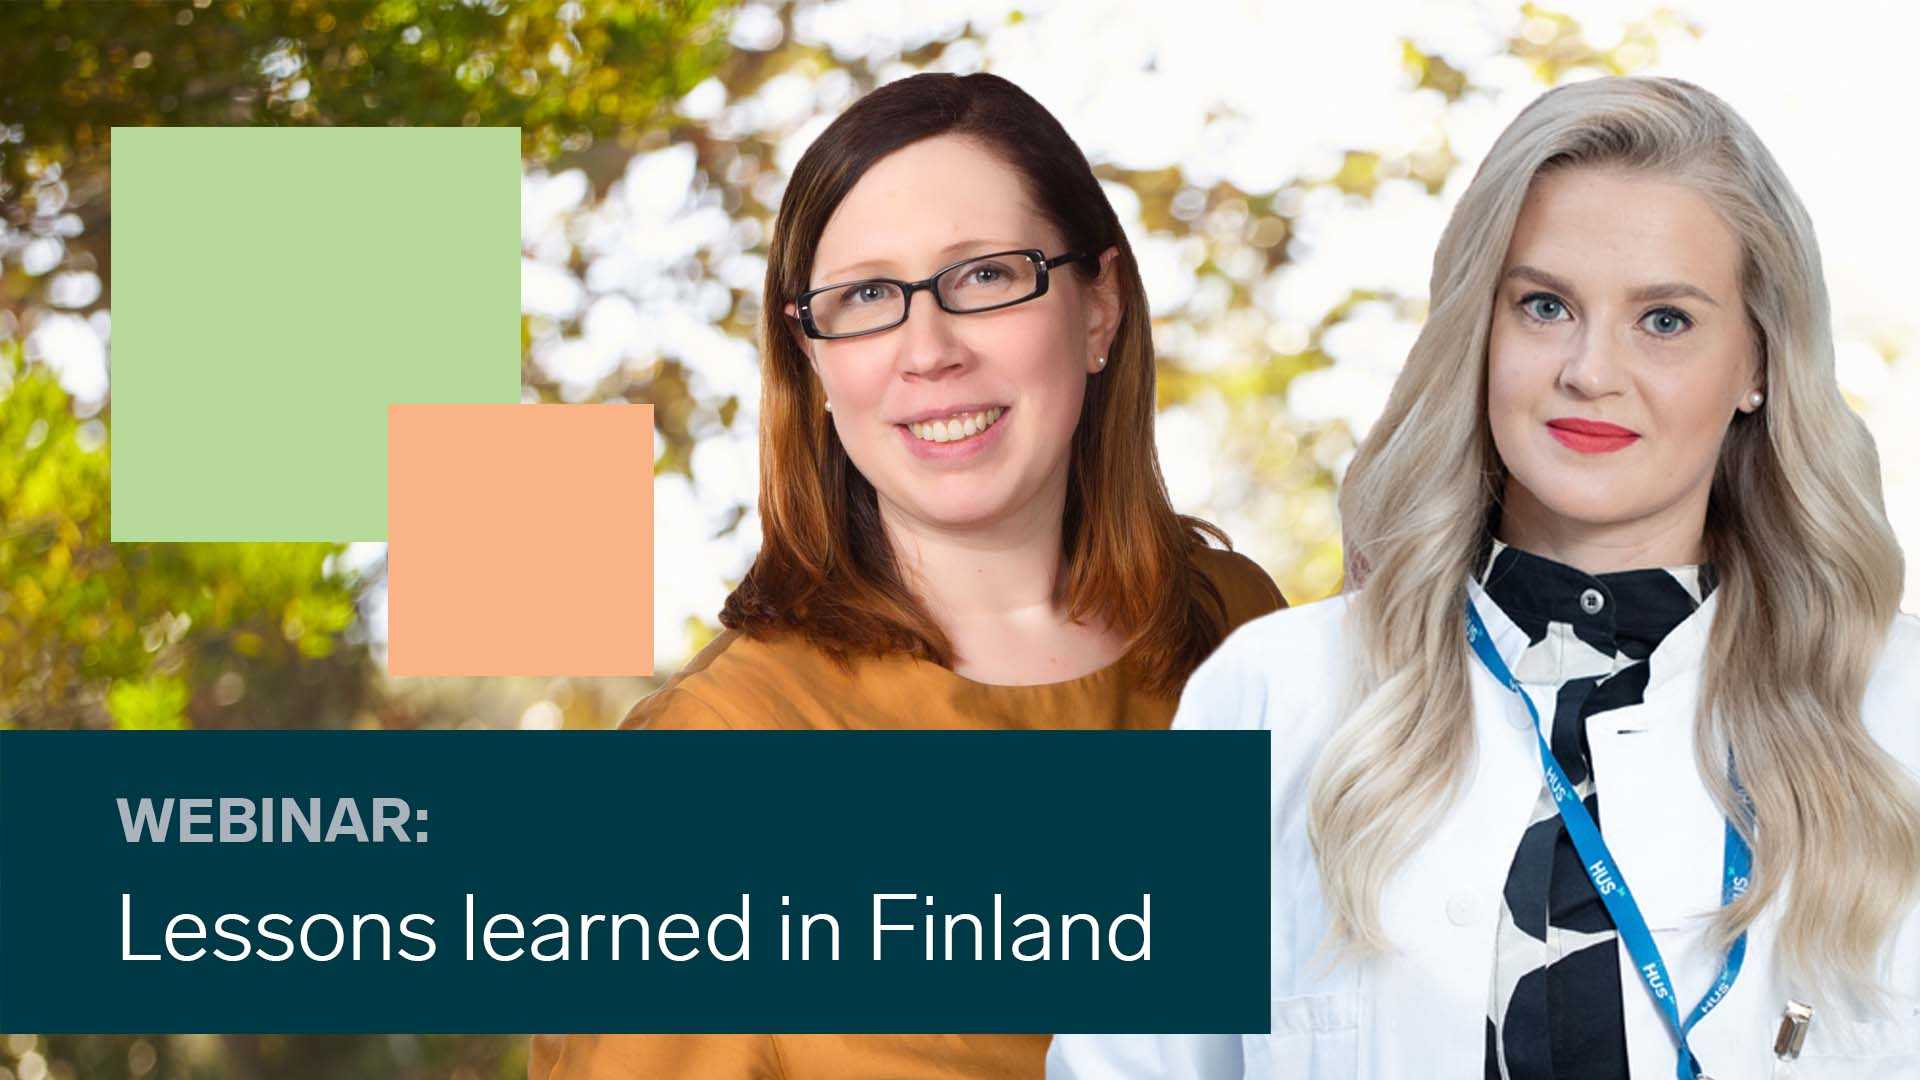 Lotta Schepel and Carita Linden-Lahti reflect on the implementation of a new electronic health record system at the Finnish hospital where they work.